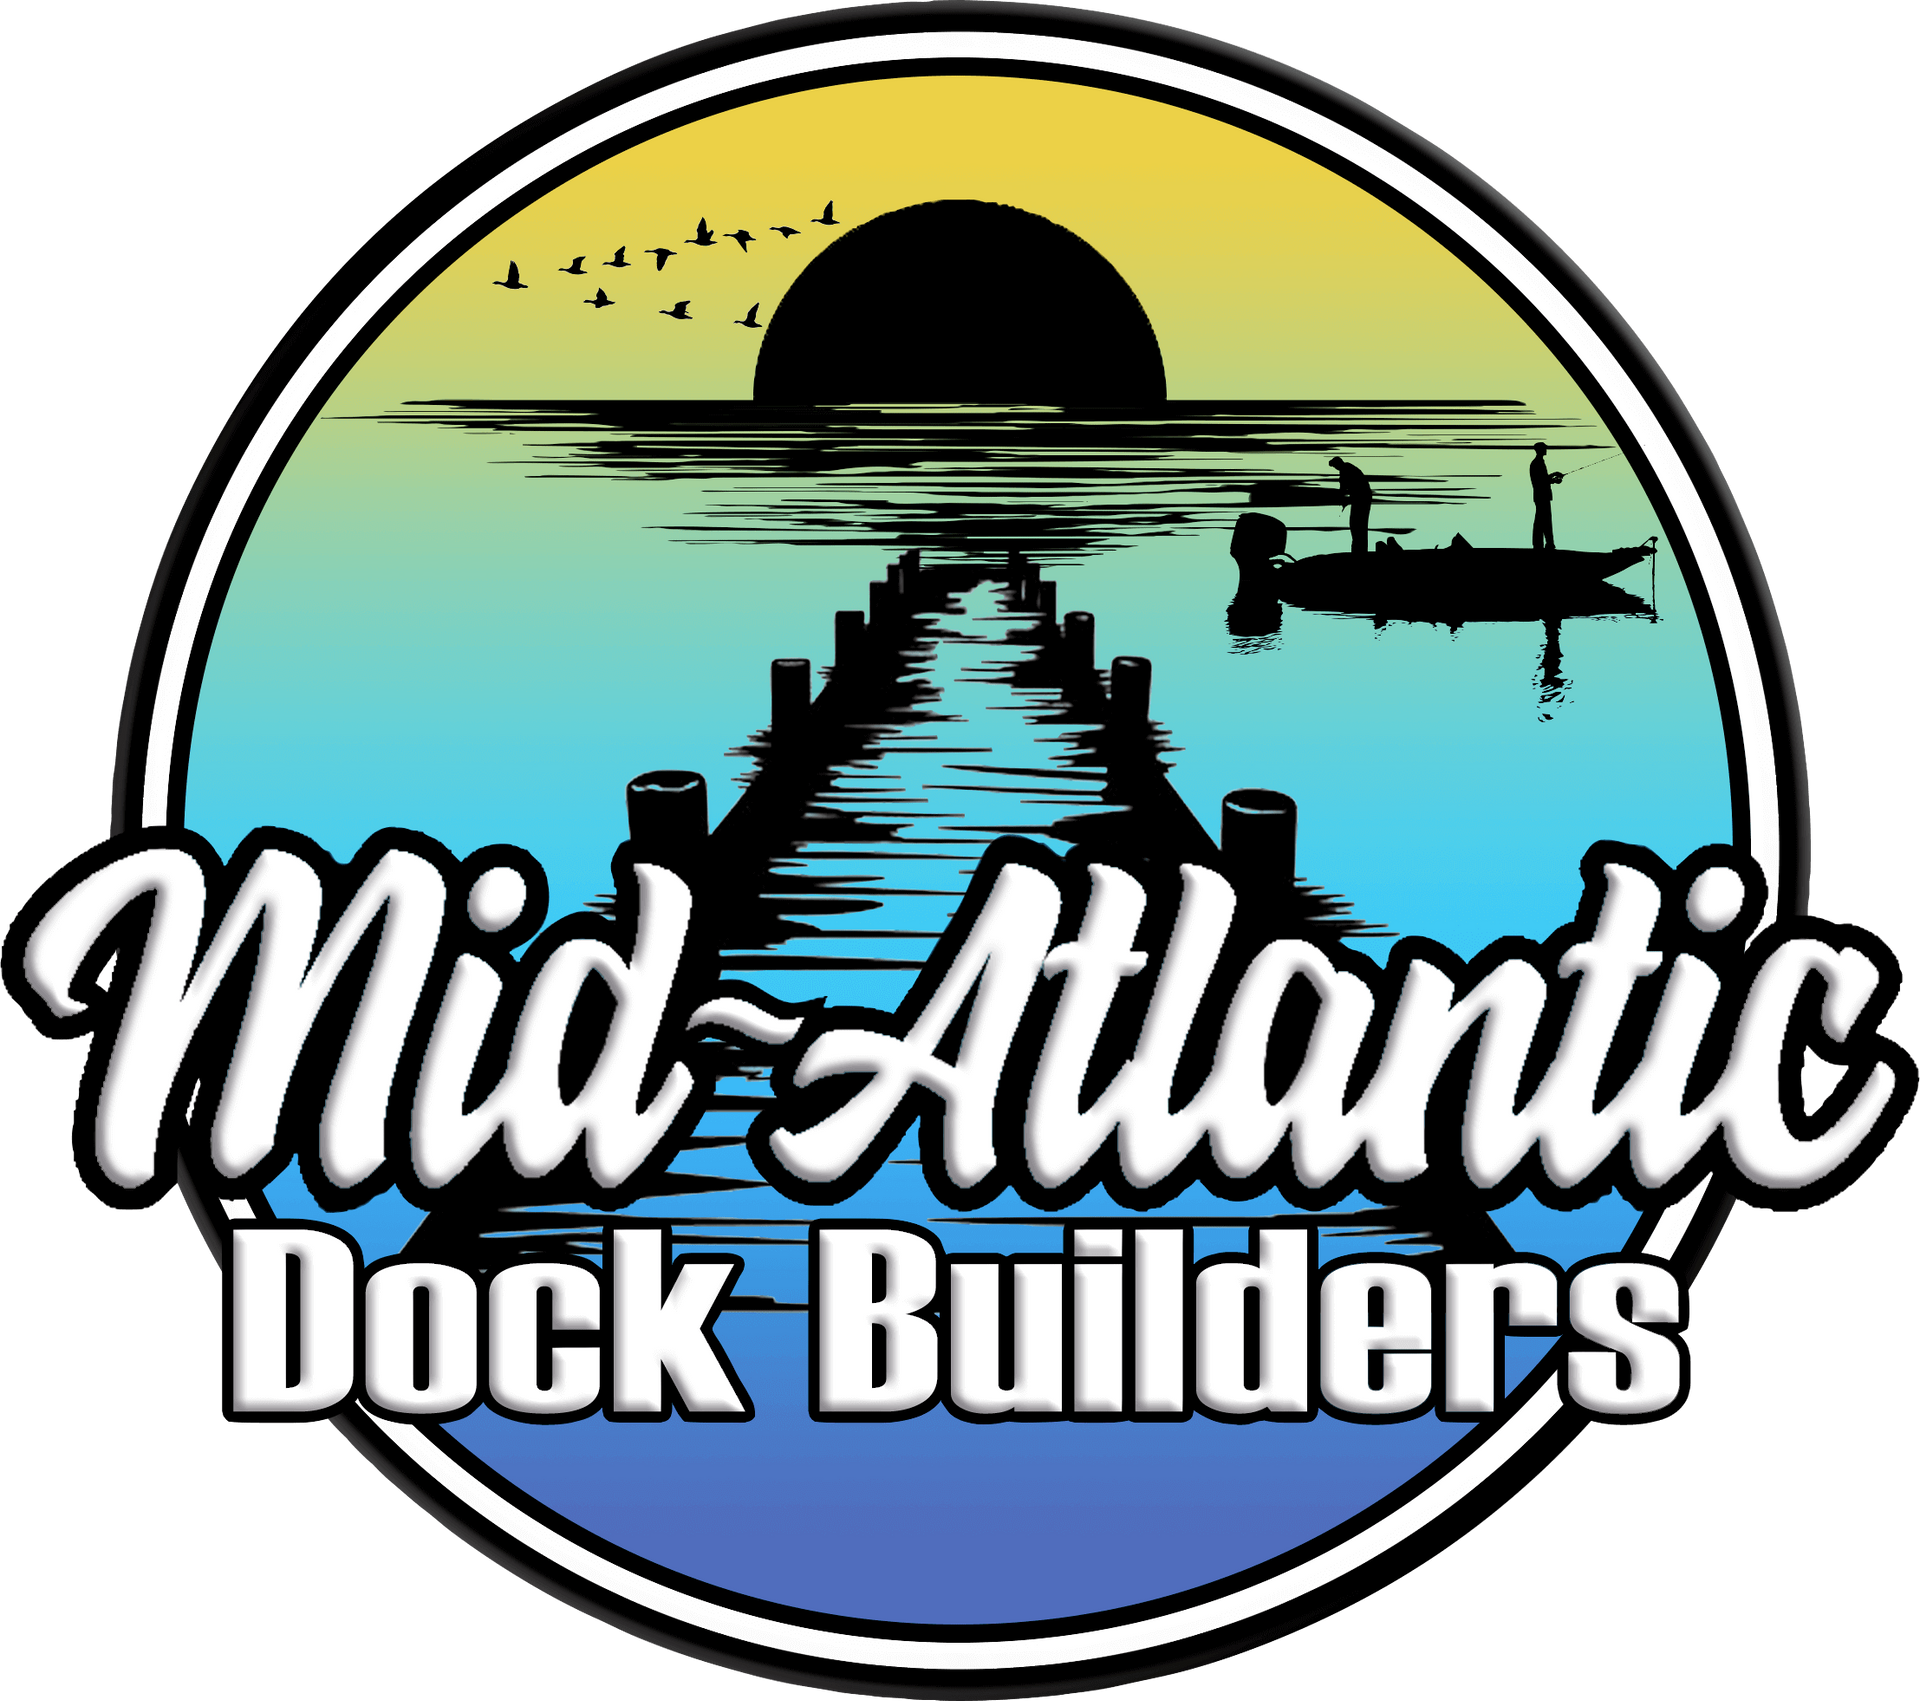 The logo for mid-atlantic dock builders shows a dock and boats in the water.